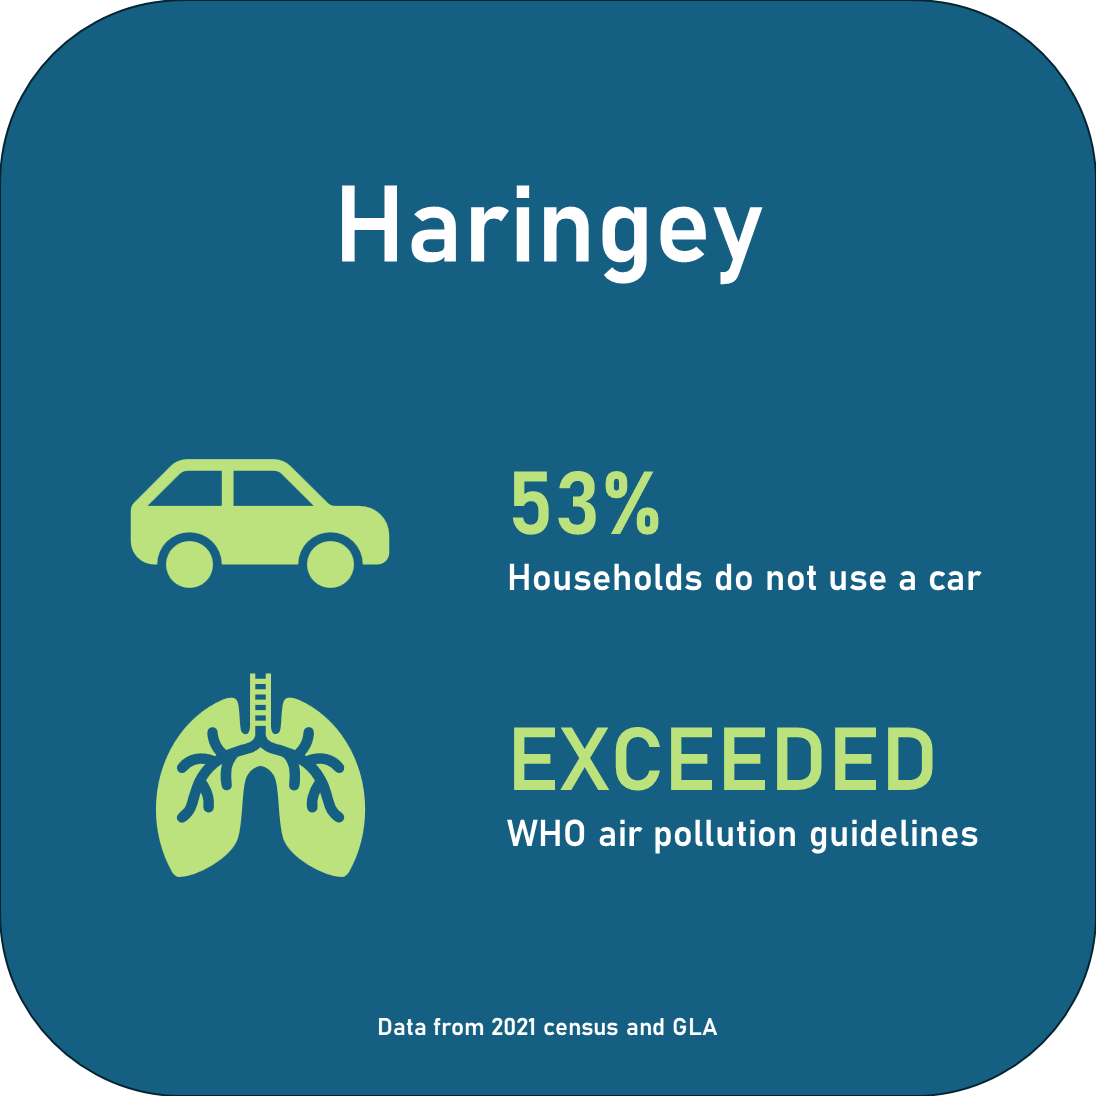 53% households do not use a car. Exceeded WHO air pollution guidelines.